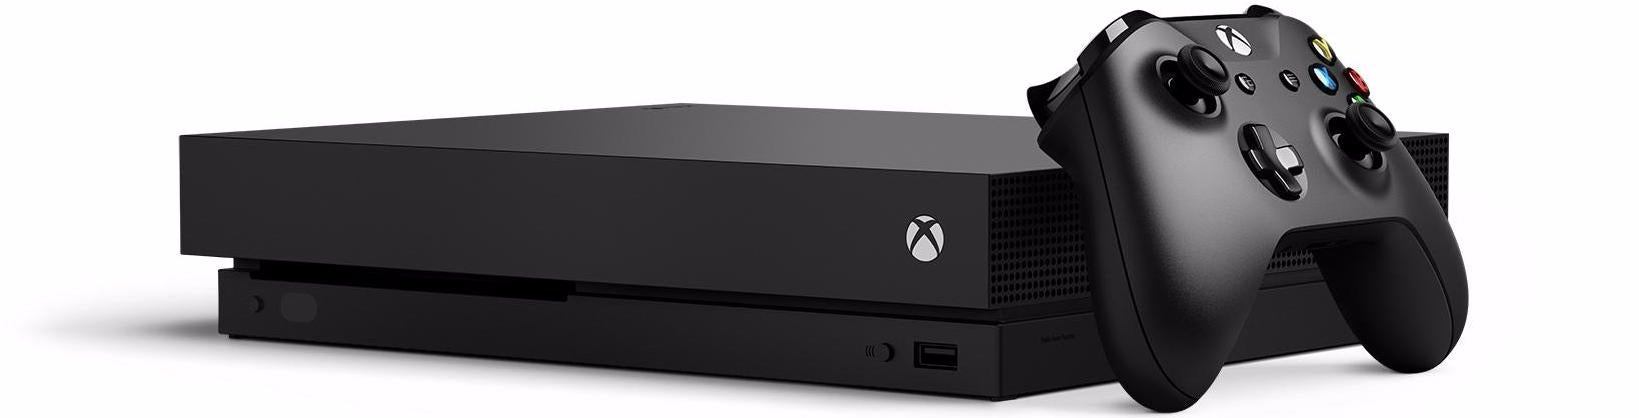 Image for Xbox One X is $500 - so how much will next-gen consoles cost?